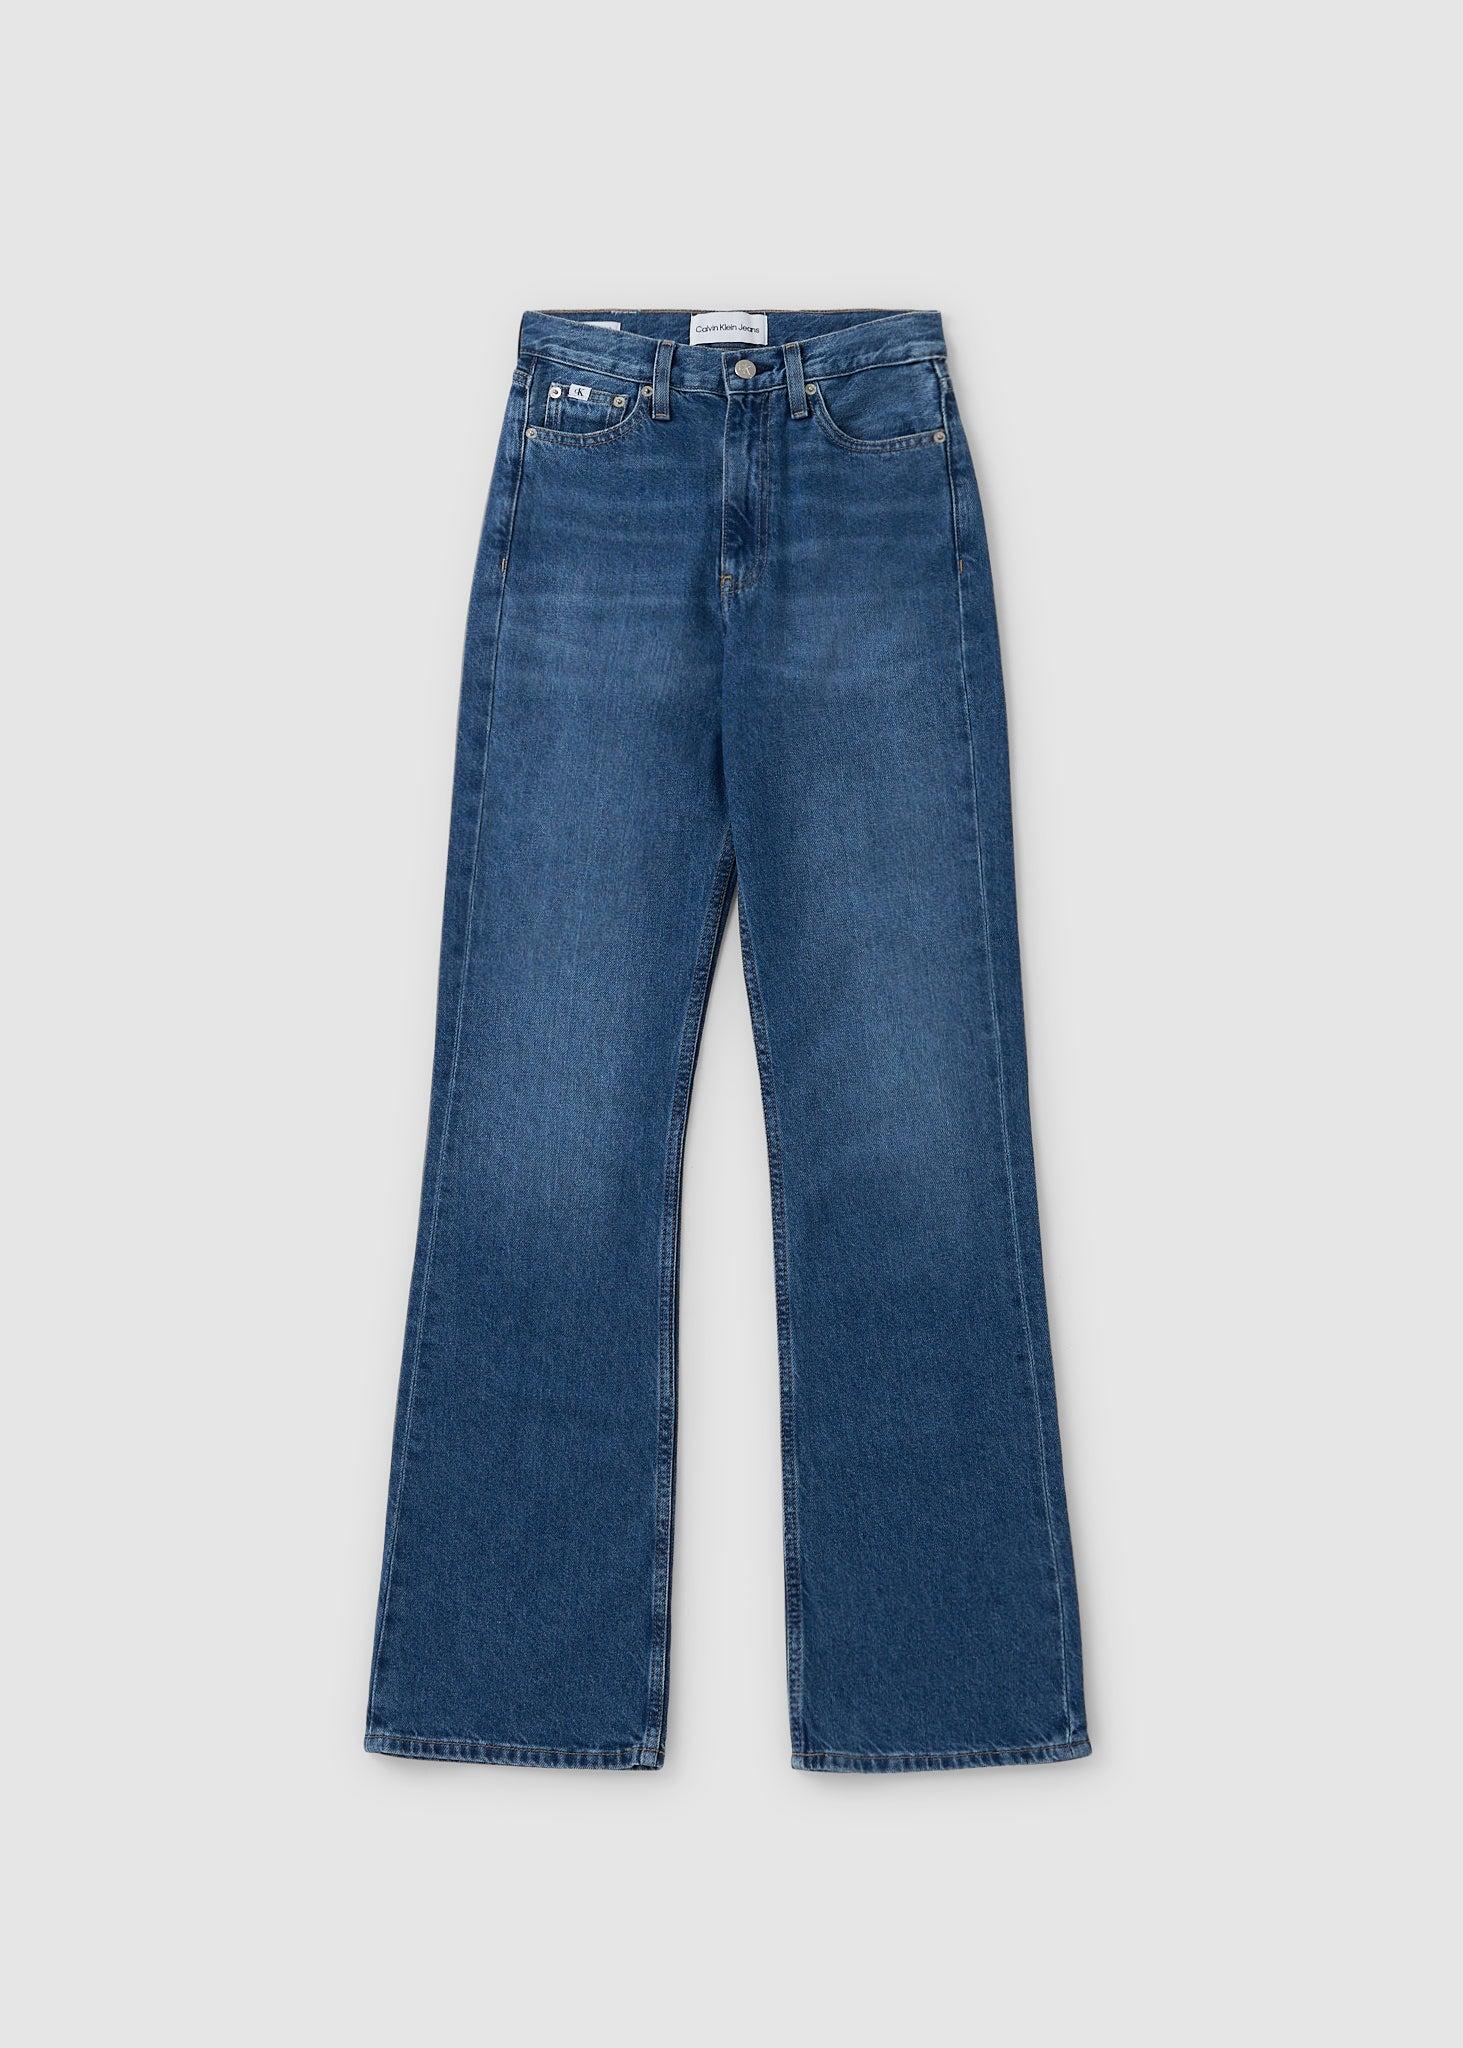 Calvin Klein Authentic Bootcut Jeans in Blue | Lyst